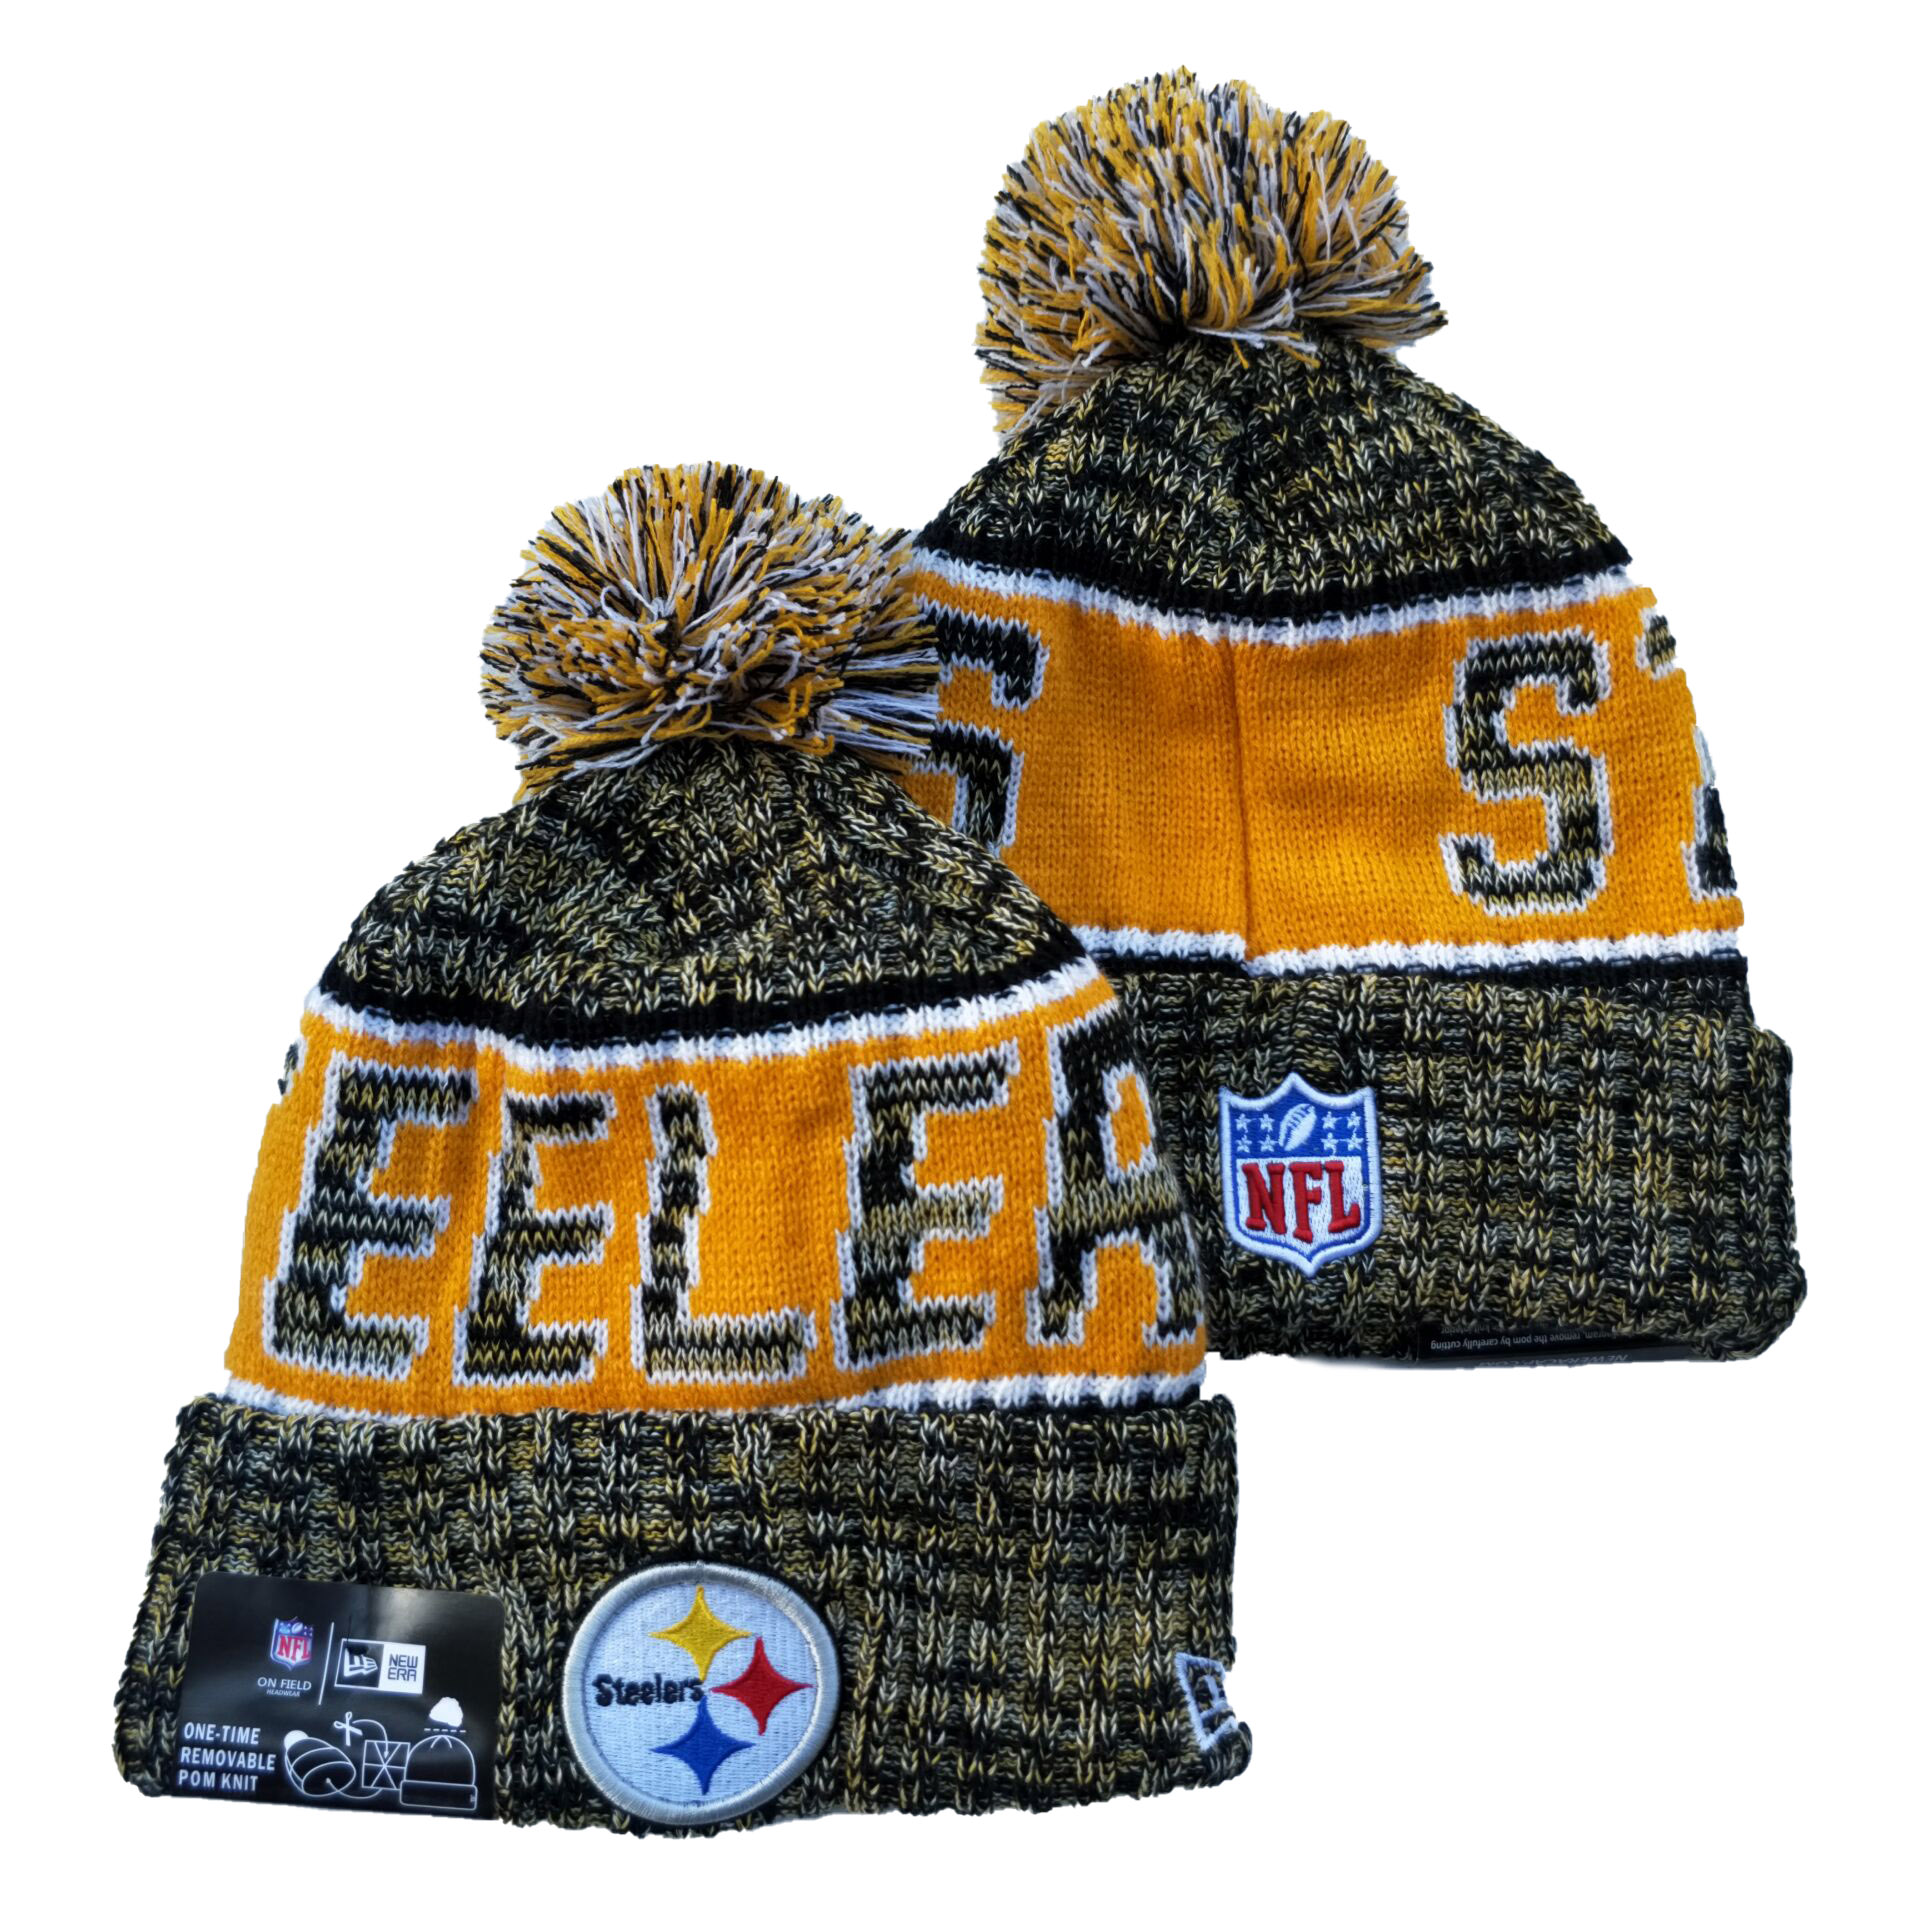 NFL Pittsburgh Steelers Knit Hats 060 [NFLHat_Steelers_0060] - $9.99 ...